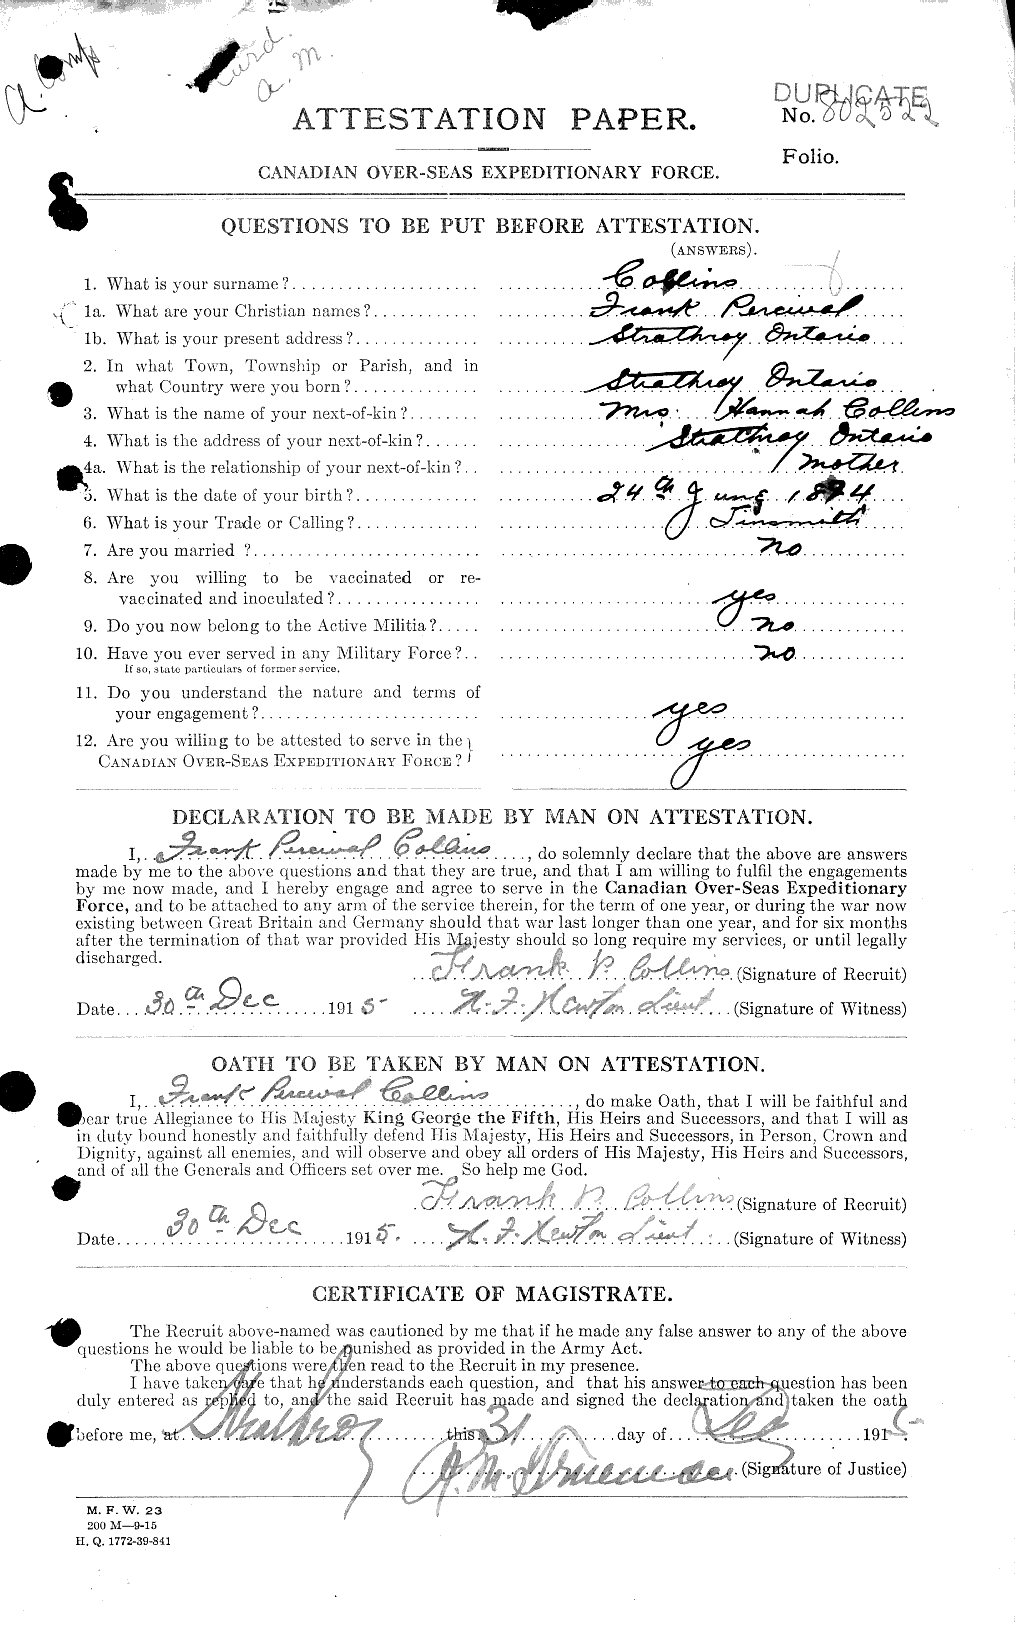 Personnel Records of the First World War - CEF 037818a